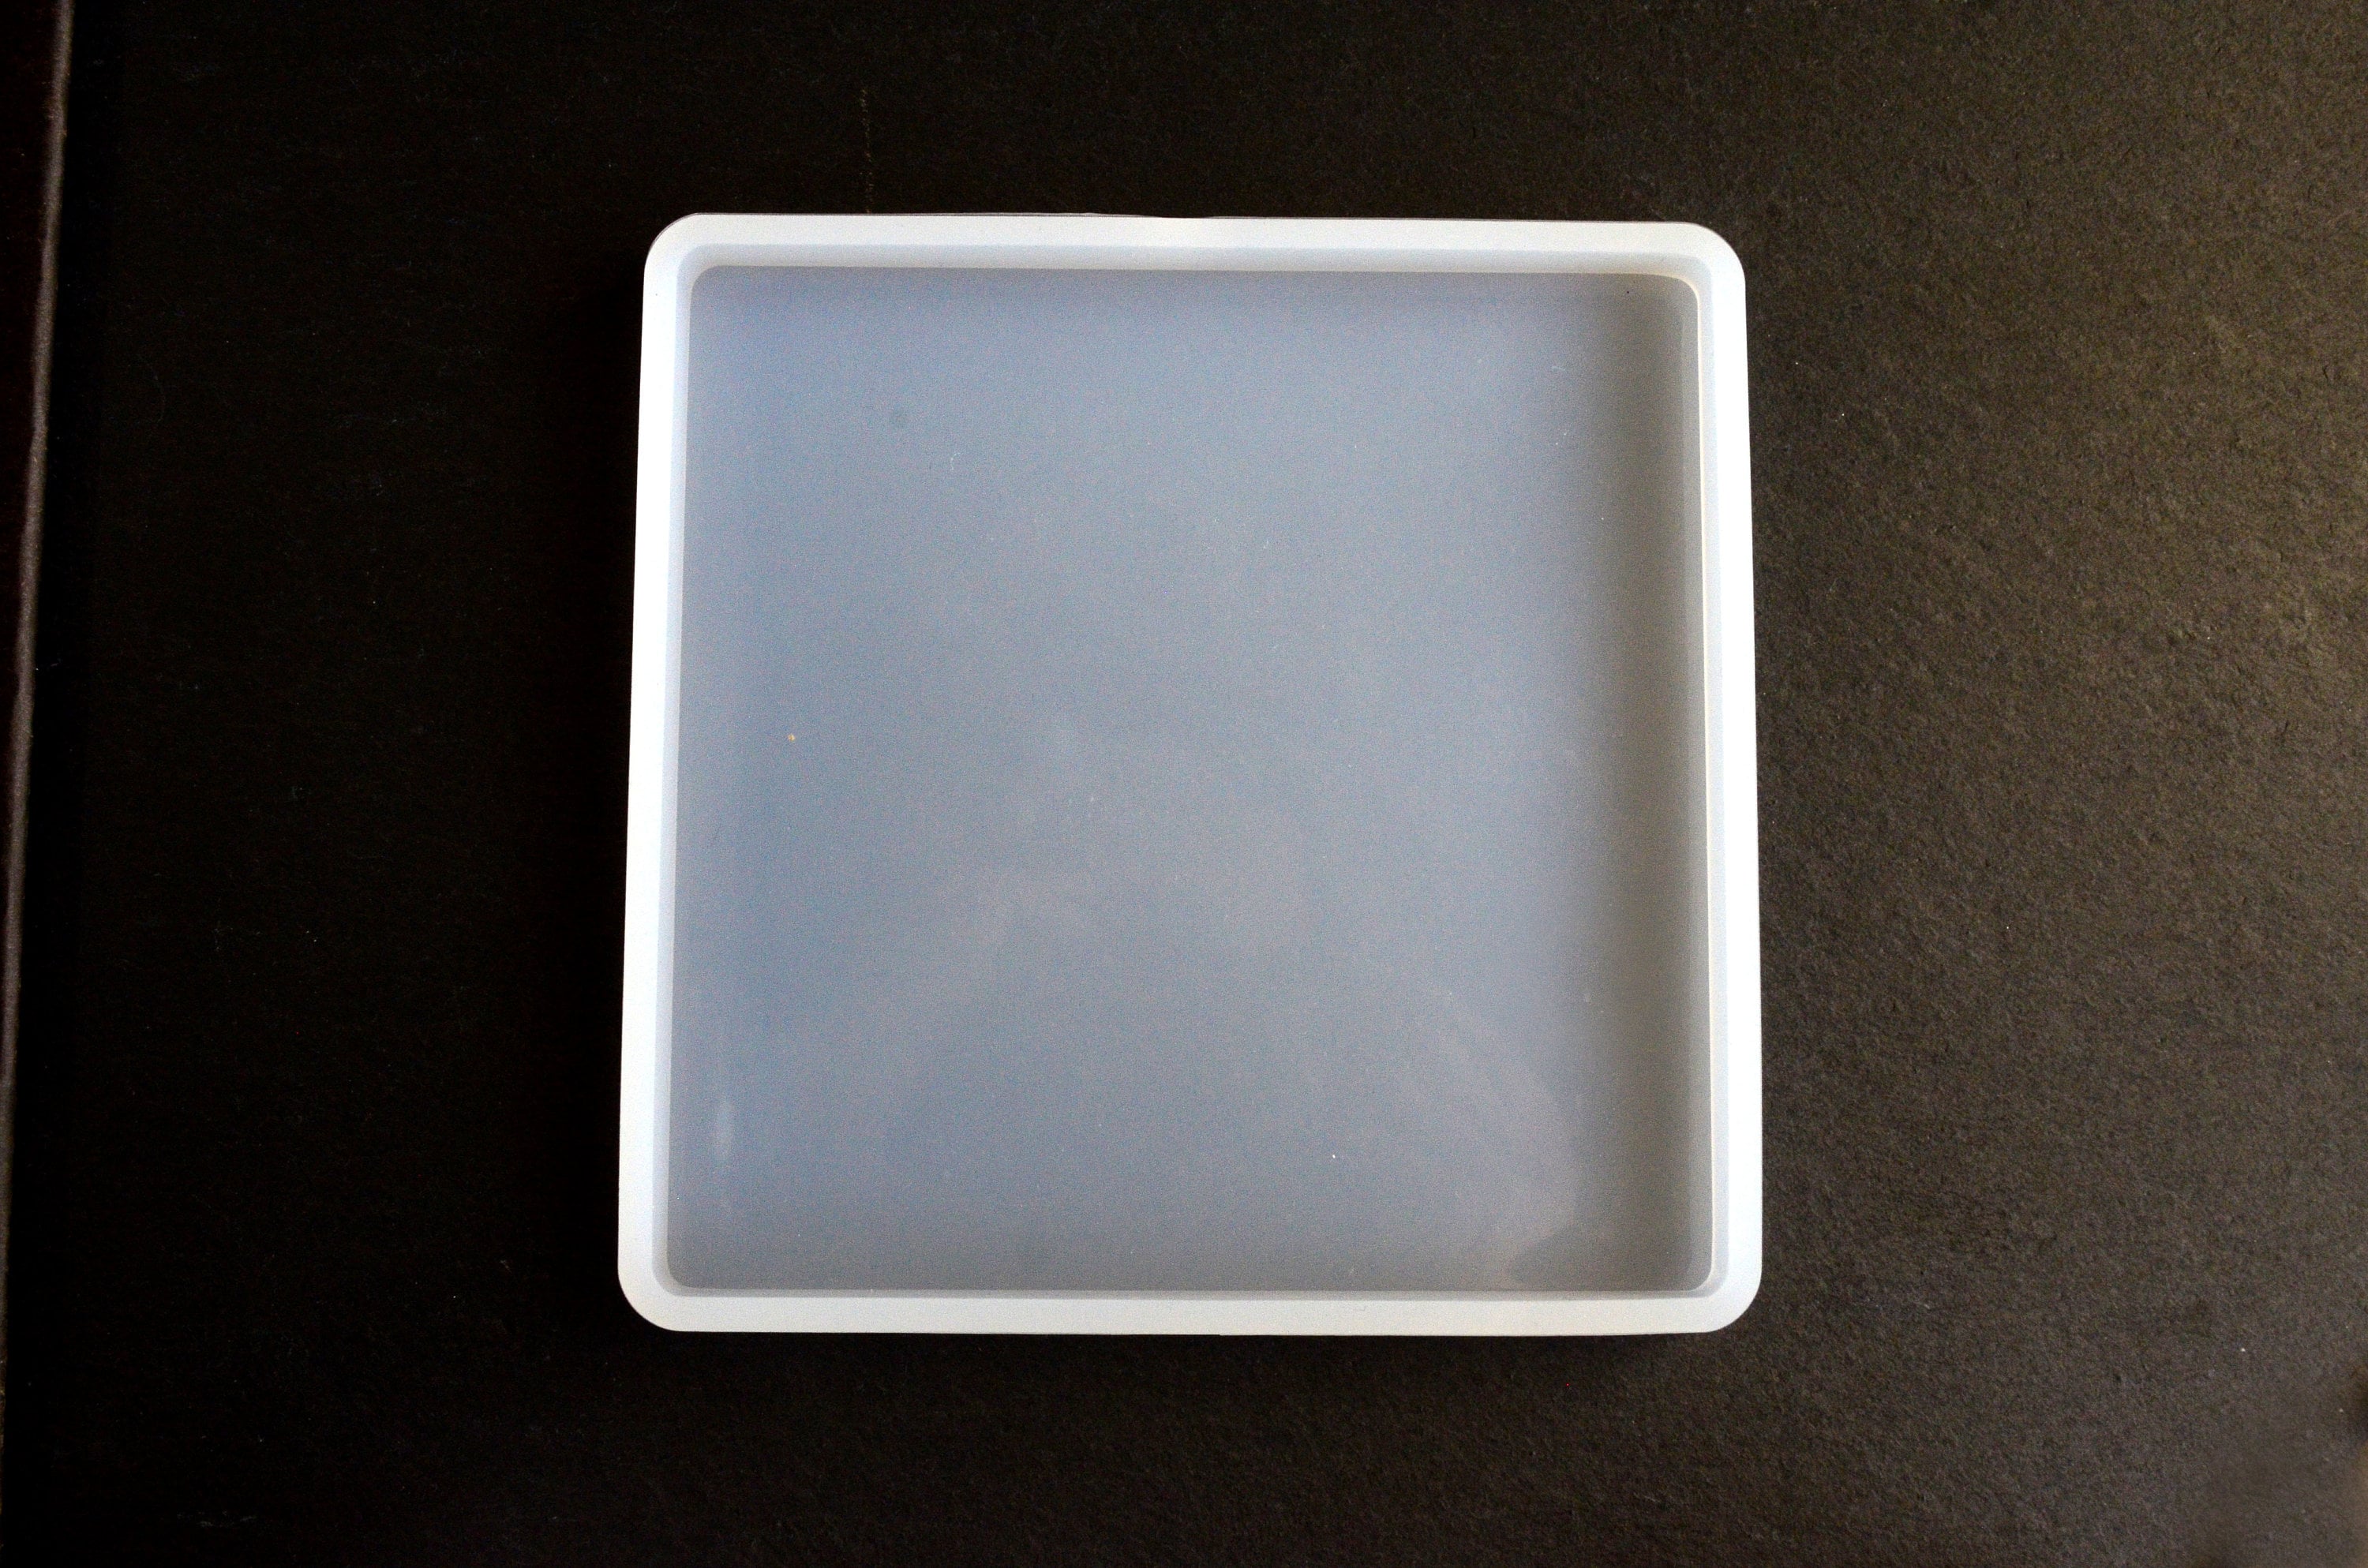 10 X 10 X 3 Clear Silicone Block Mold / Deep Silicone Mold / Resin / Soap  Loaf Mould / Concrete 